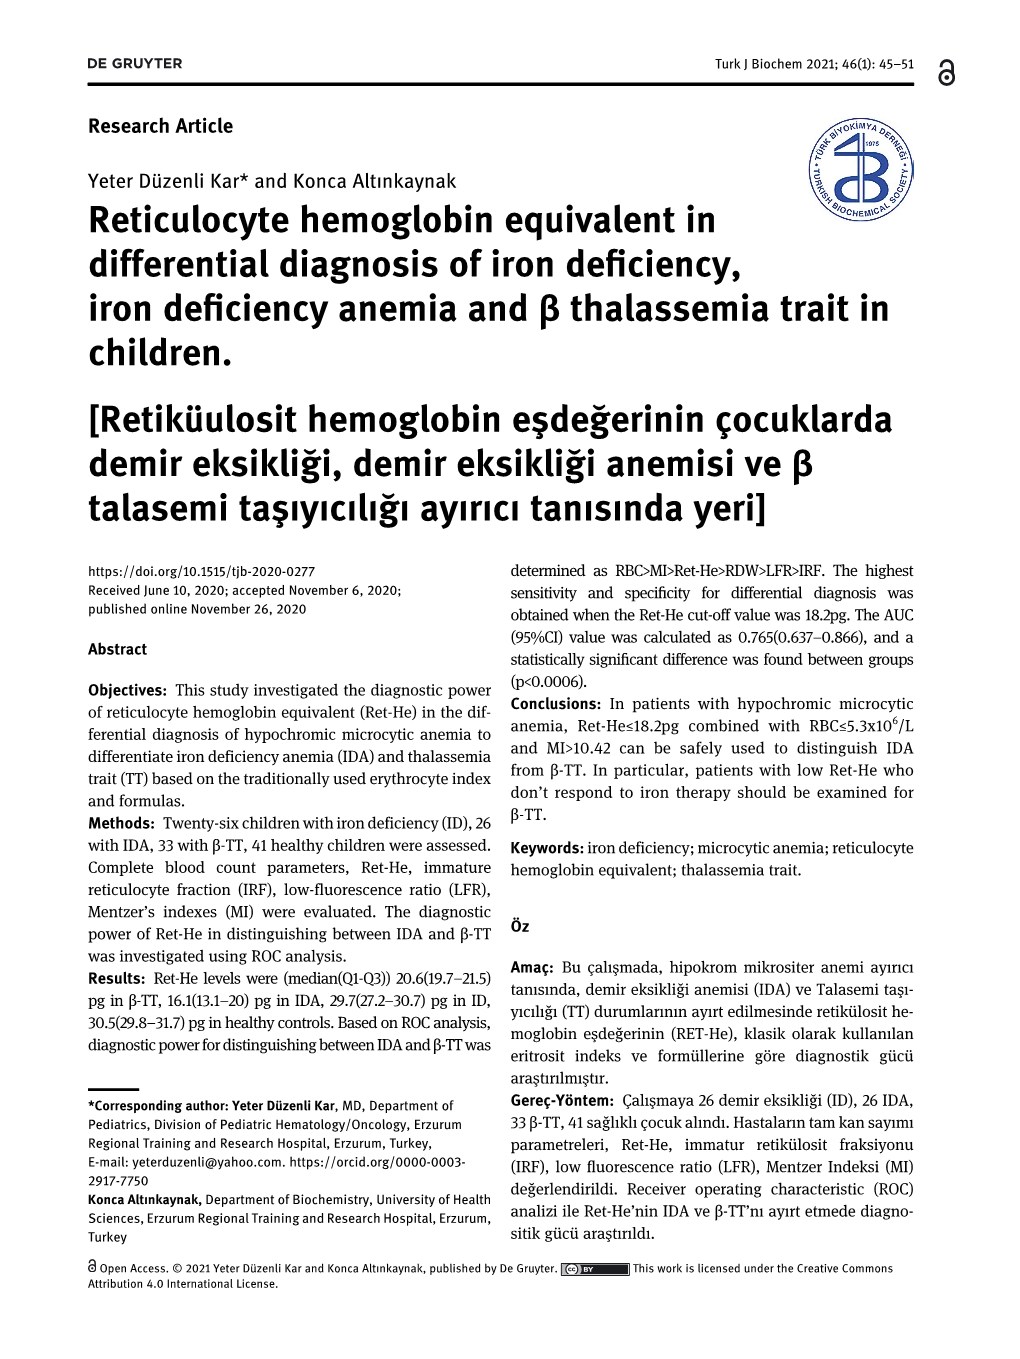 Reticulocyte Hemoglobin Equivalent in Differential Diagnosis of Iron Deﬁciency, Iron Deﬁciency Anemia and Β Thalassemia Trait in Children